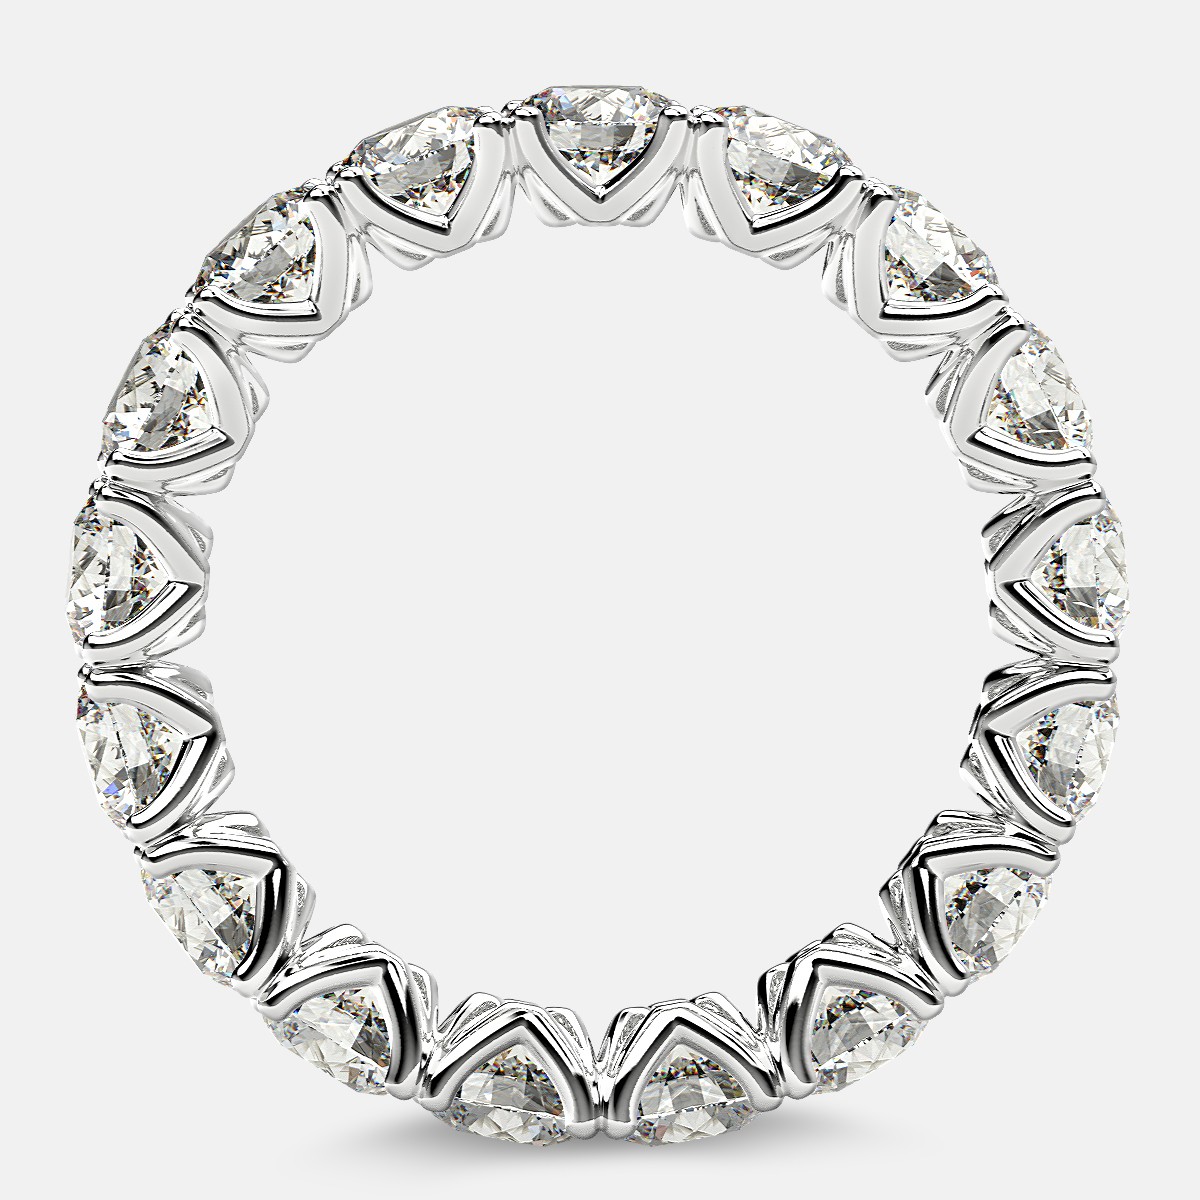 Curved V-Prong Eternity Ring with Round Diamonds in 18k White Gold